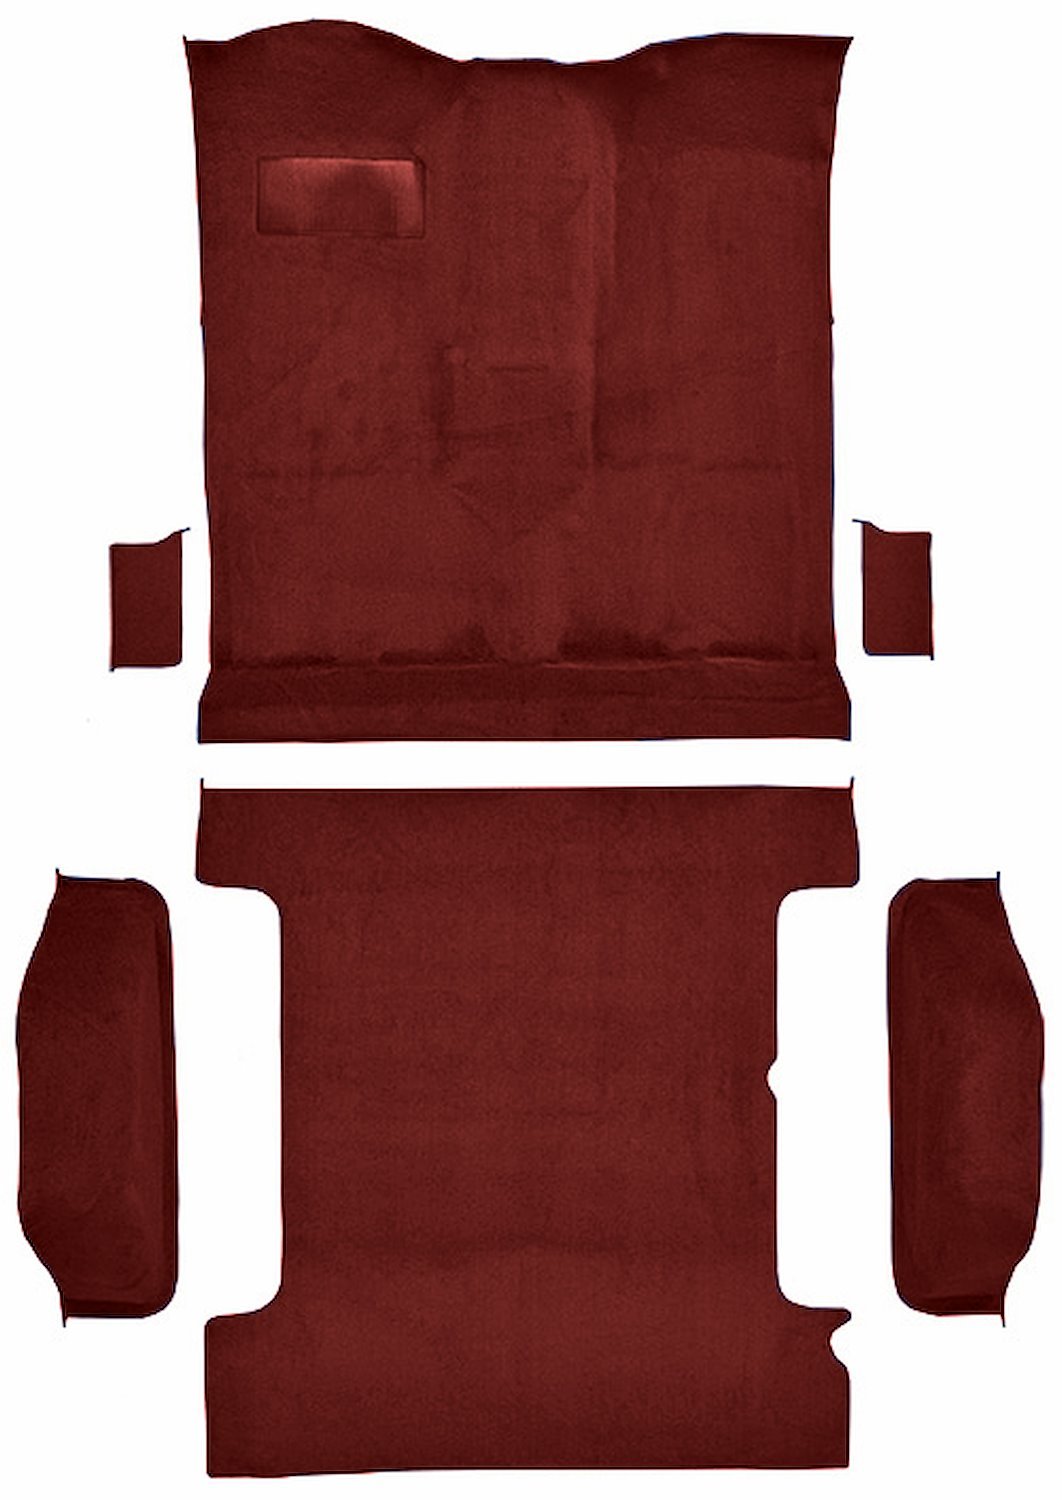 Molded Cut Pile Passenger and Cargo Area Carpet for 1978-1980 Chevrolet K5 Blazer, GMC Jimmy [Mass Backing, 6-Piece, Oxblood]